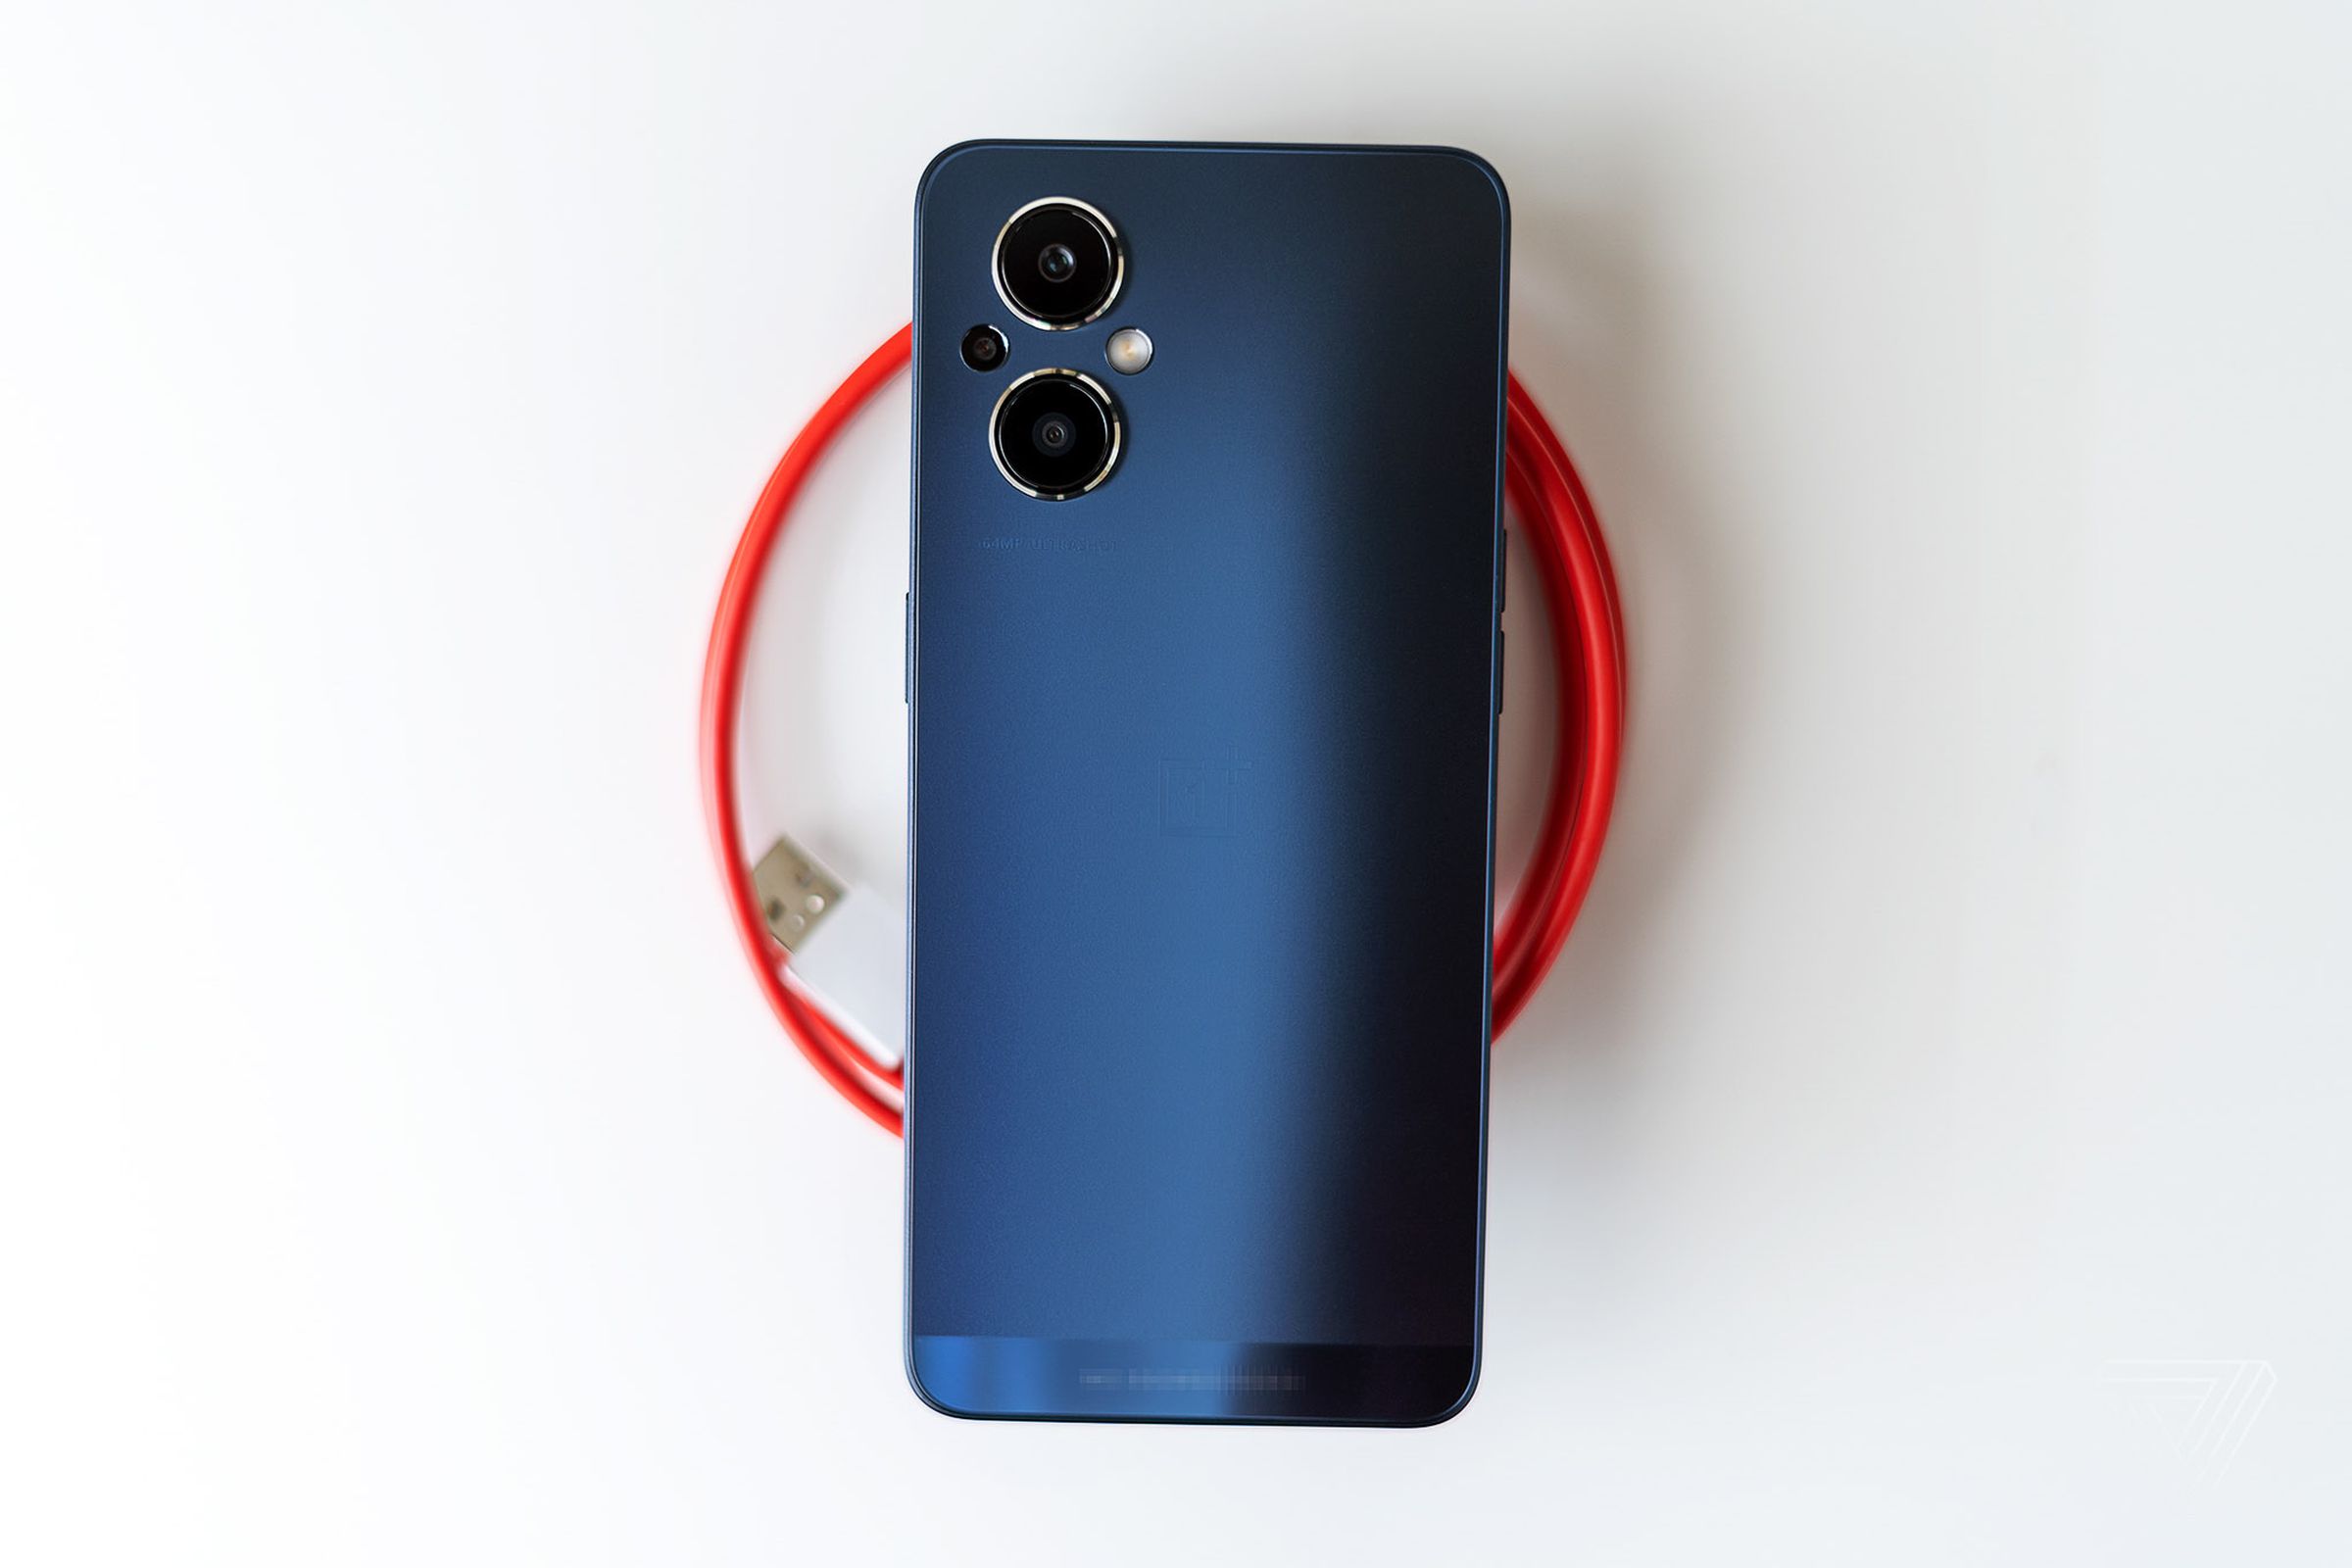 The in-box charger and signature red cable help the N20 stand out among $300 phones.